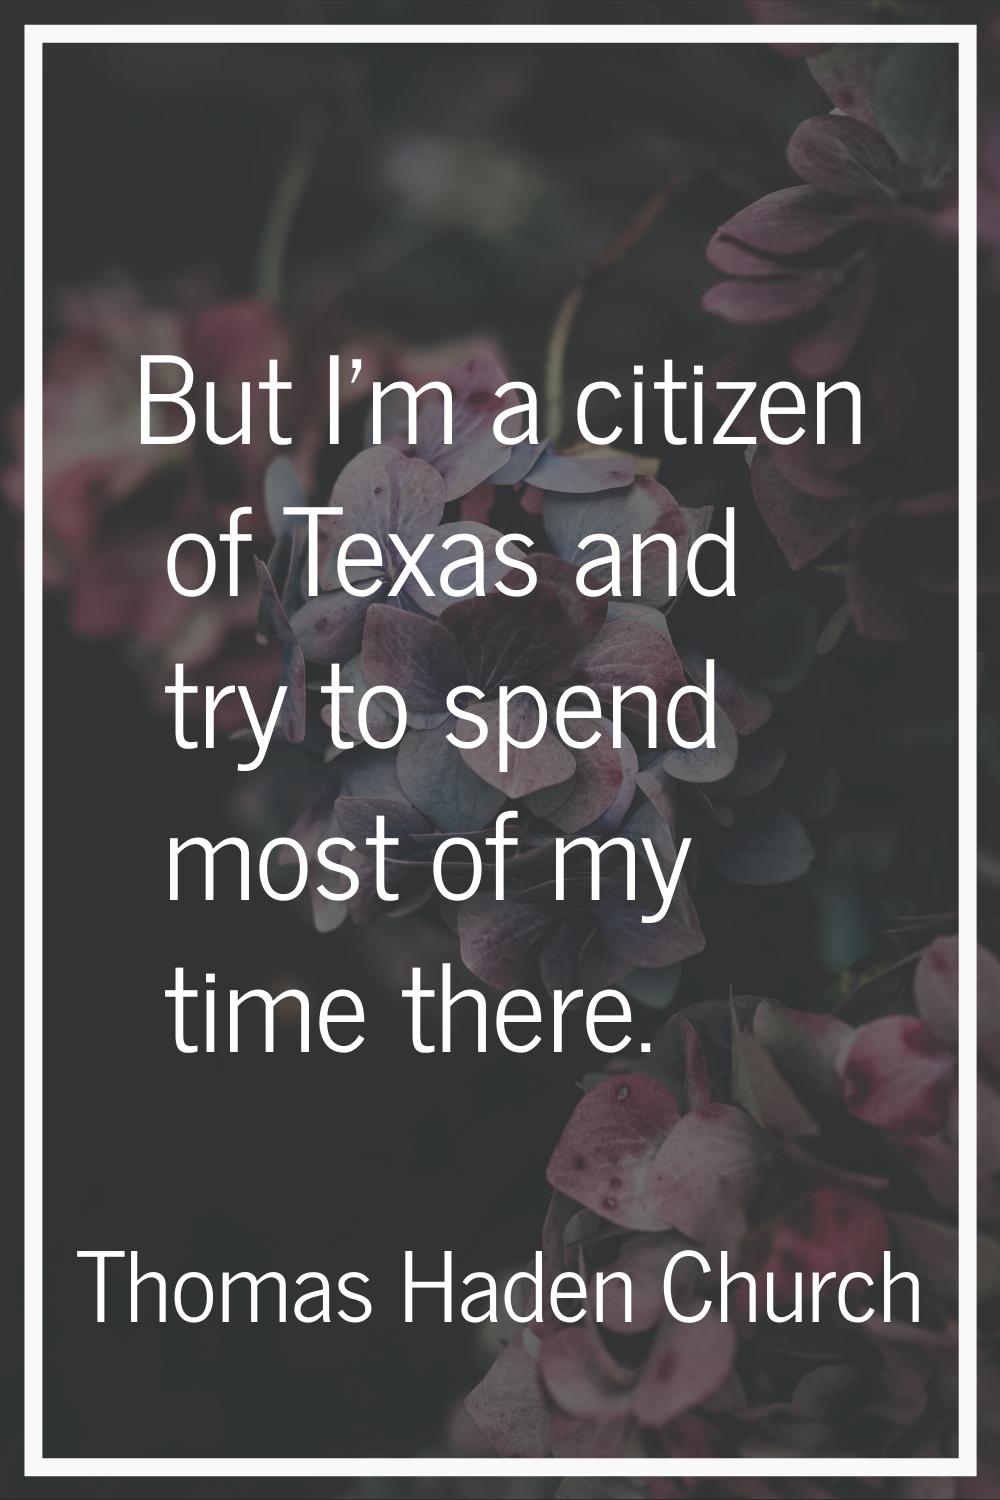 But I'm a citizen of Texas and try to spend most of my time there.